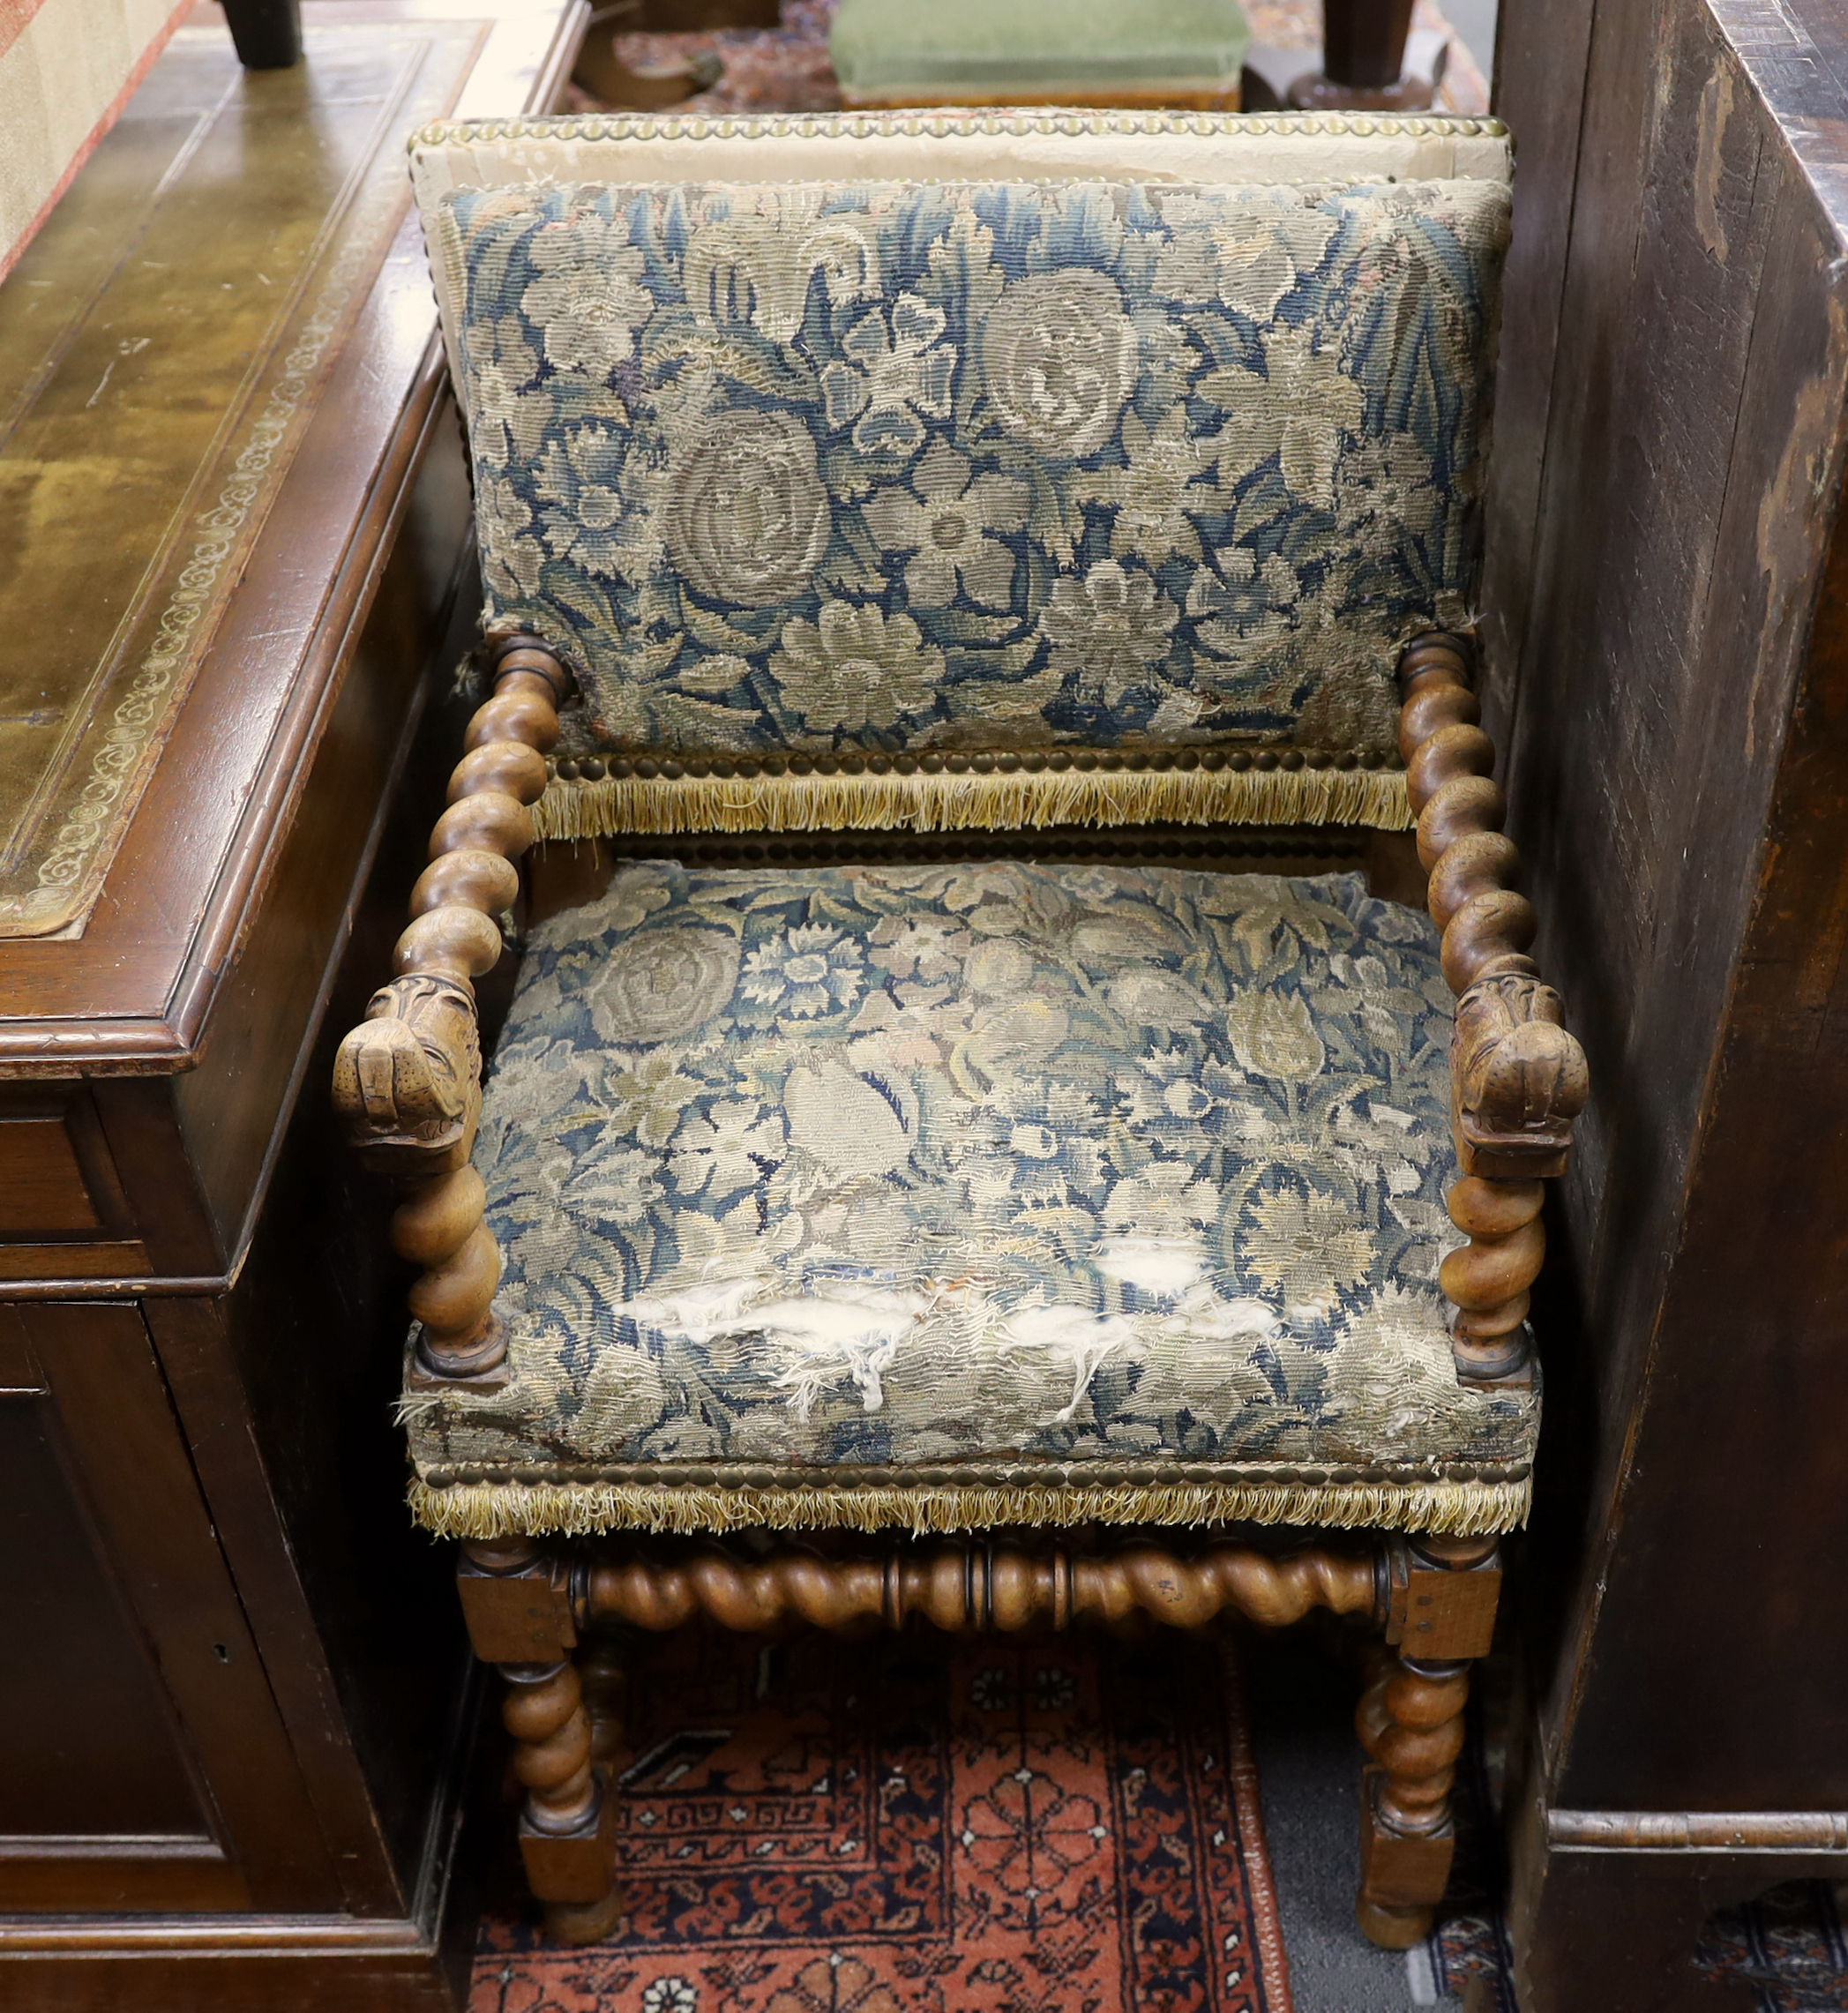 A pair of Louis XIII walnut fauteuils, recovered with 17th/18th century verdure tapestry to the seats and backs., Provenance – Sotheby’s, Paris, European Private collection sale, 16th April 2003, lot number 51